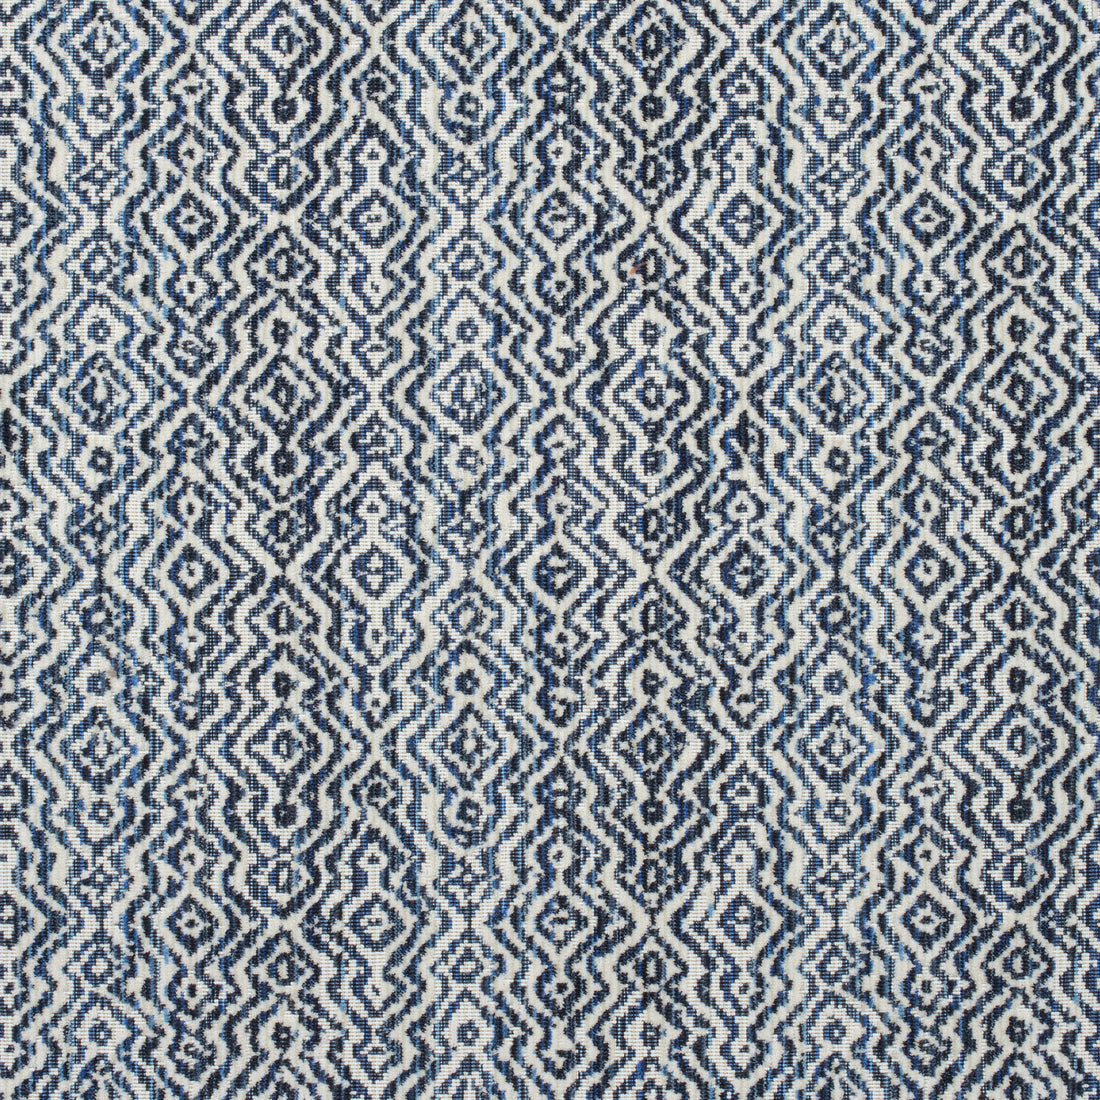 Anastasia fabric in navy color - pattern number W80691 - by Thibaut in the Woven Resource 11: Rialto collection